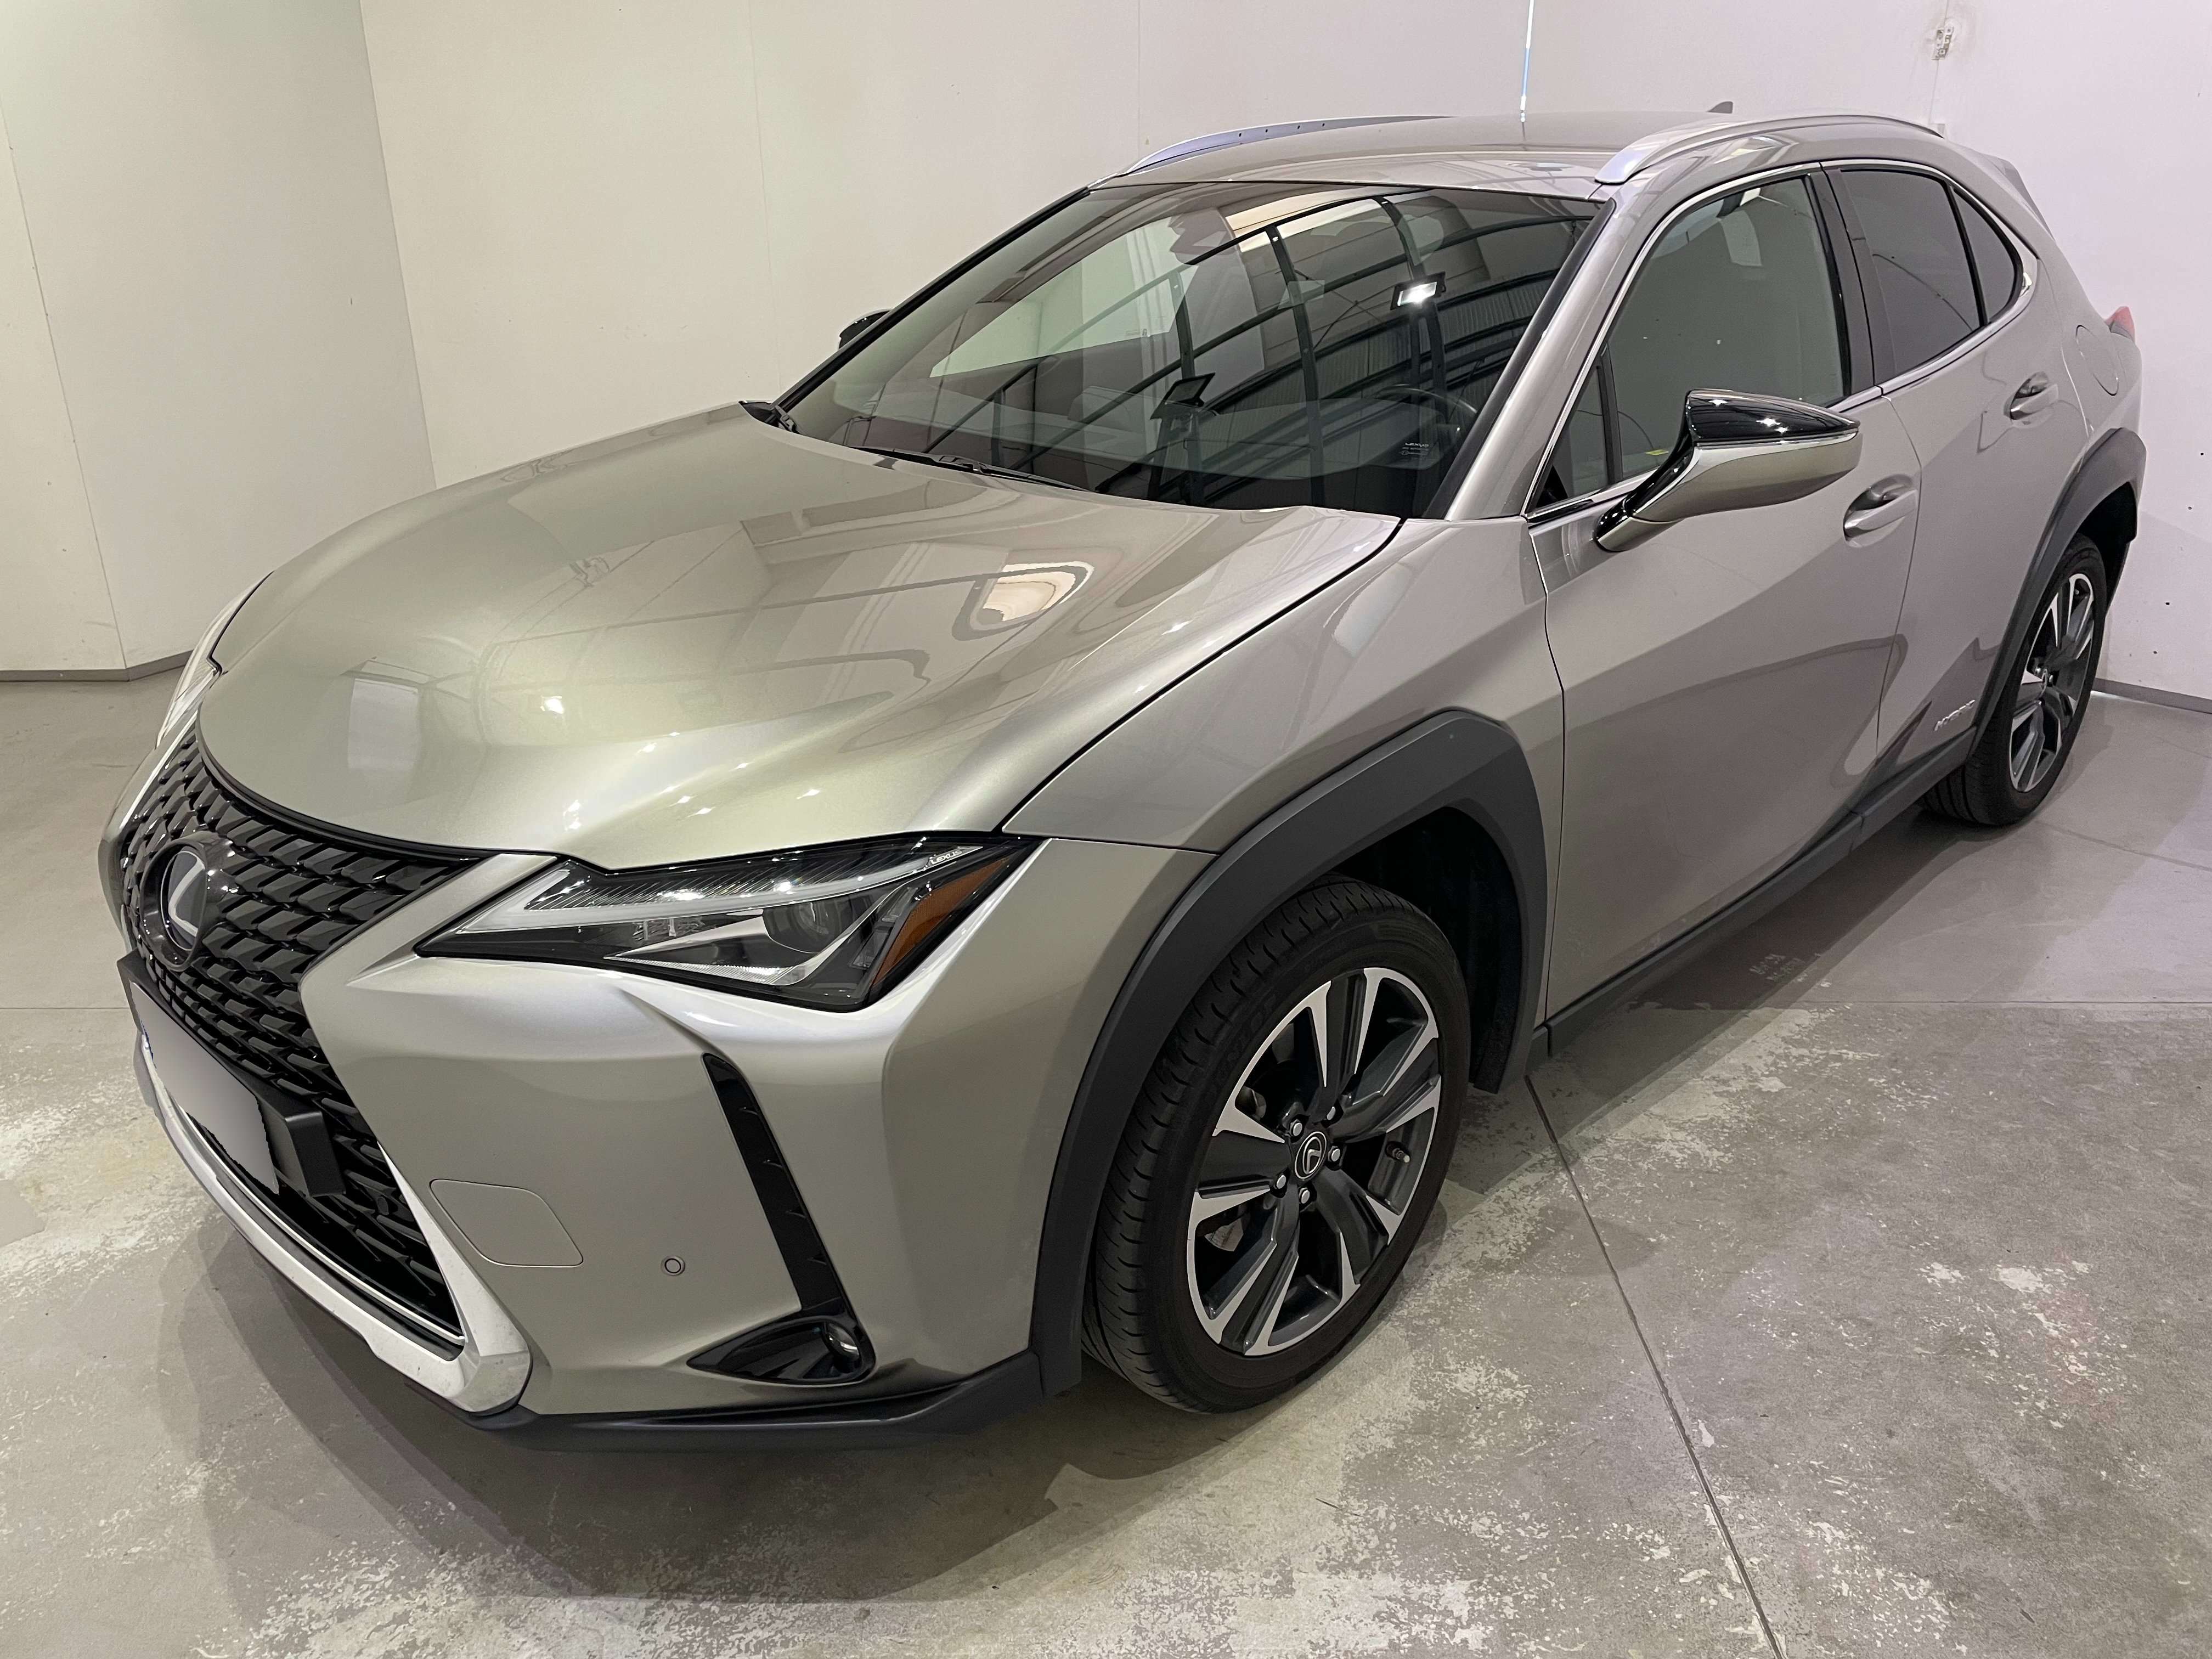 Lexus UX 200 Off-Road/Pick-up in Grey used in Cologno Monzese - Mi for € 25,900.-